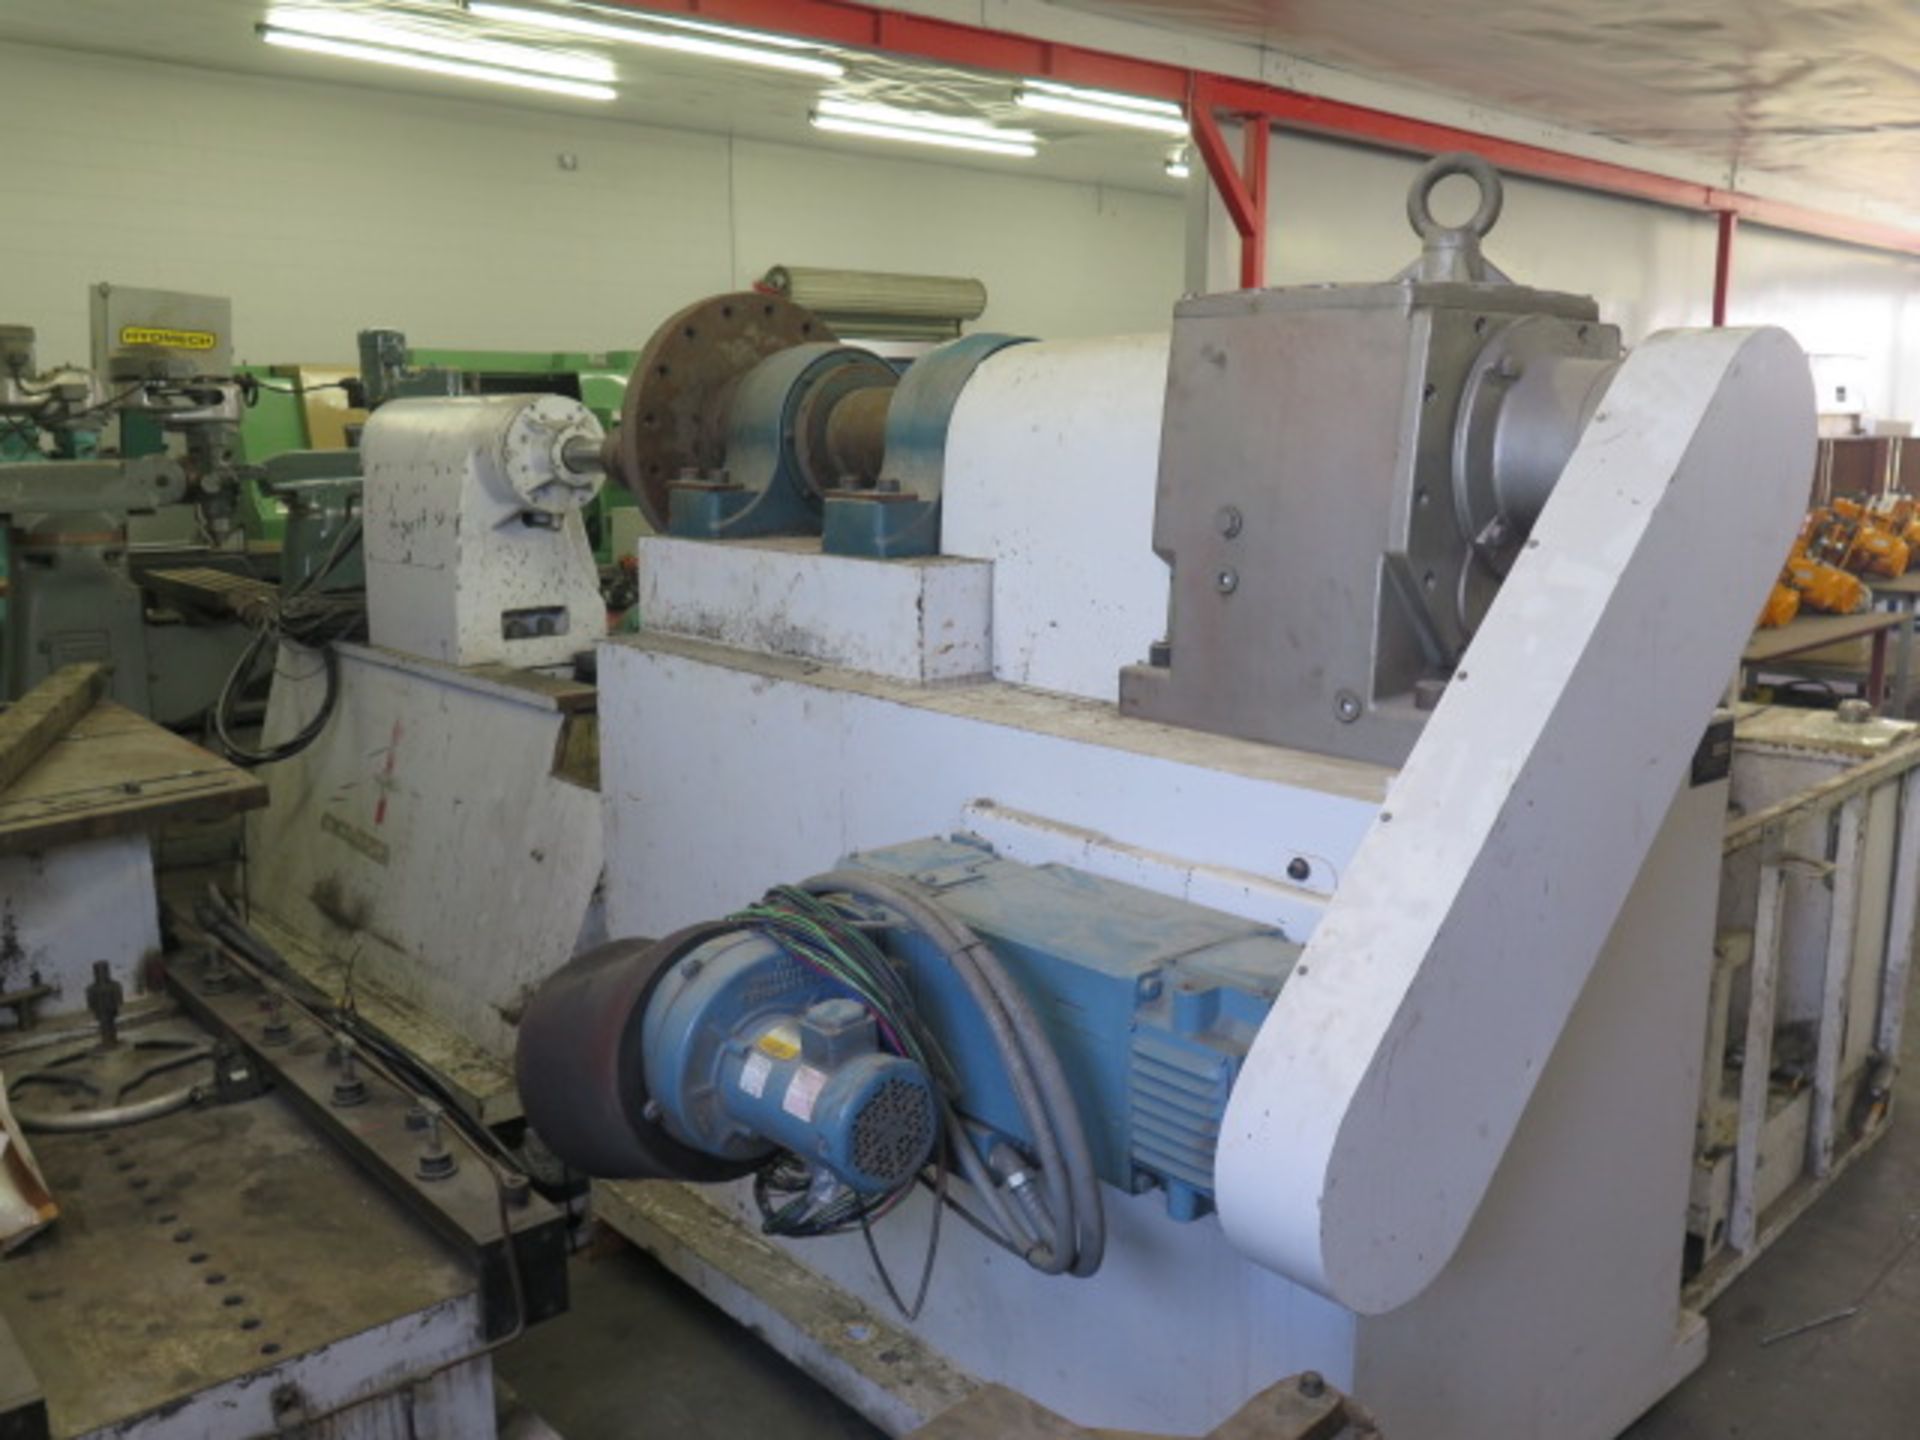 MJC Engineering mdl. SP-50200 215" CNC Spin Lathe s/n 02-603 w/ Siemens Sinumeric CNC, SOLD AS IS - Image 4 of 18